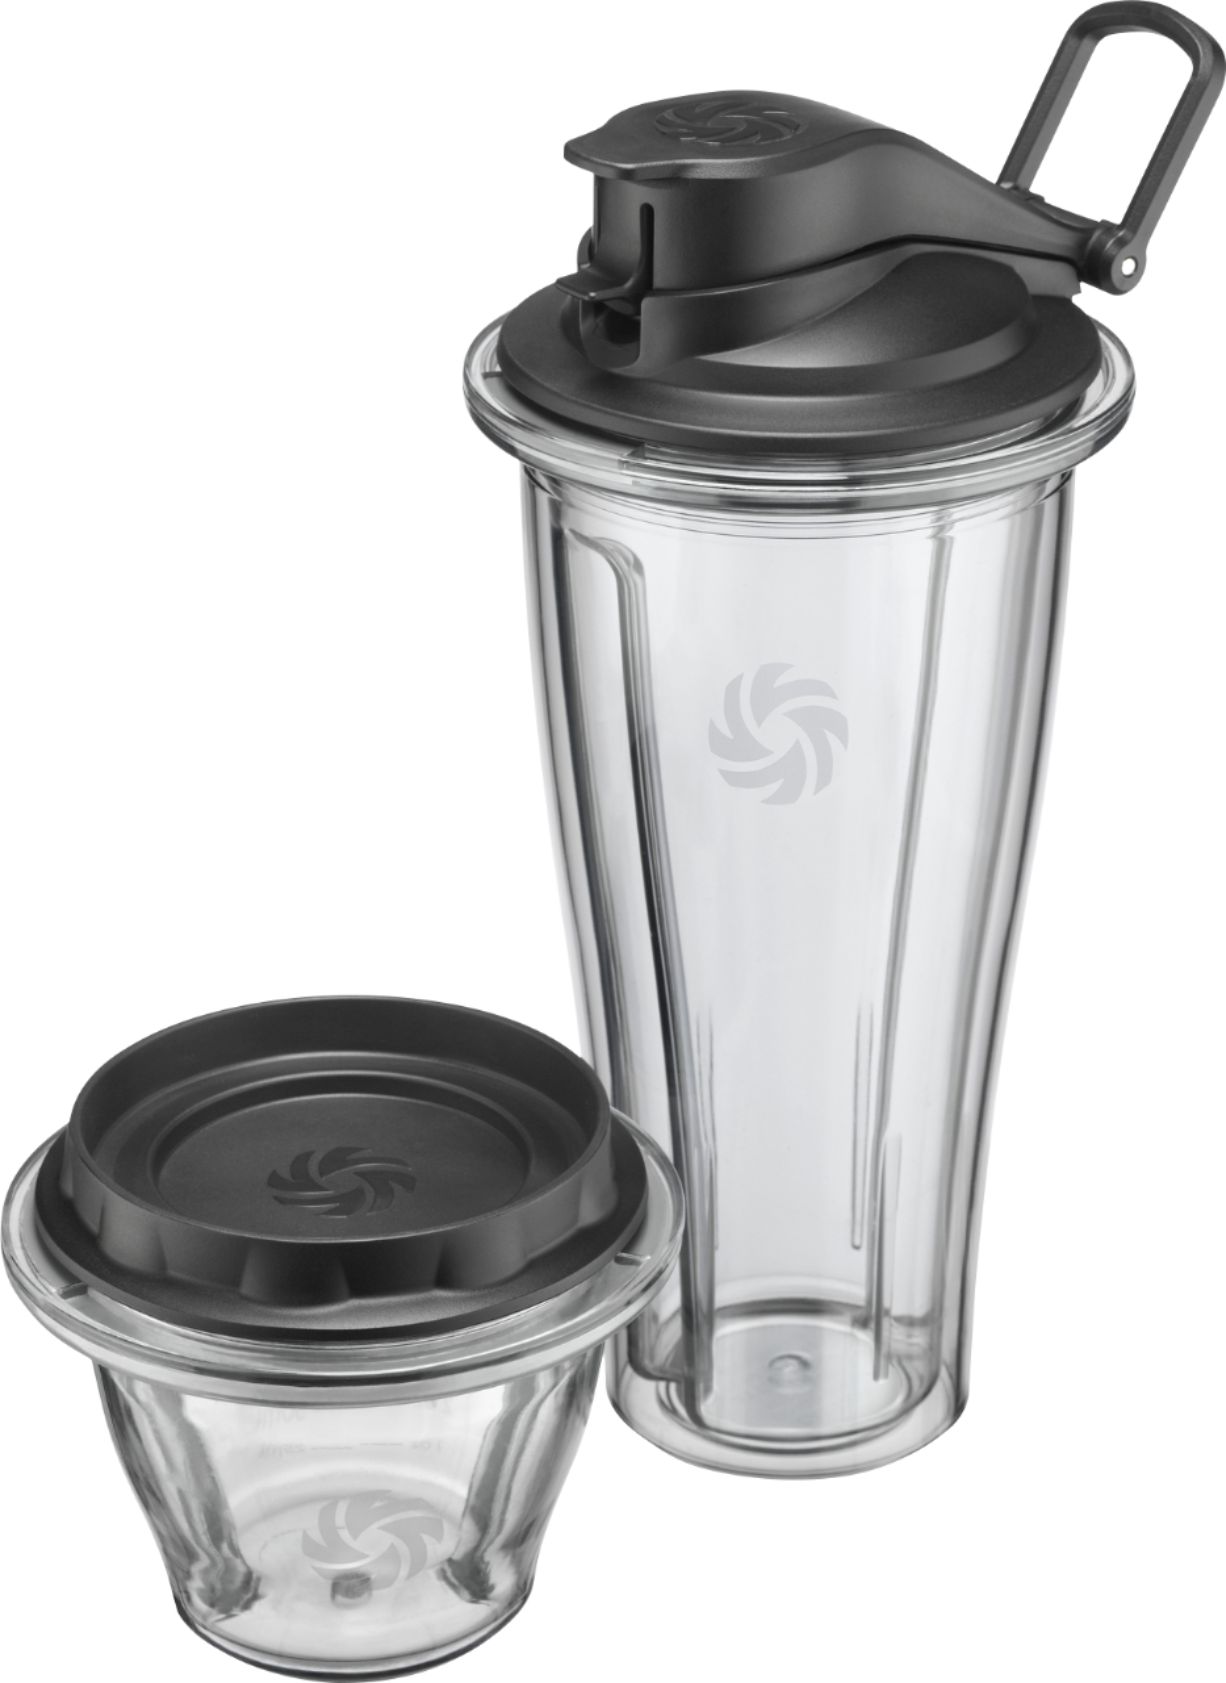 Left View: Ninja - 16 oz. Single Serve Cups with Lids (2-Pack) - Clear